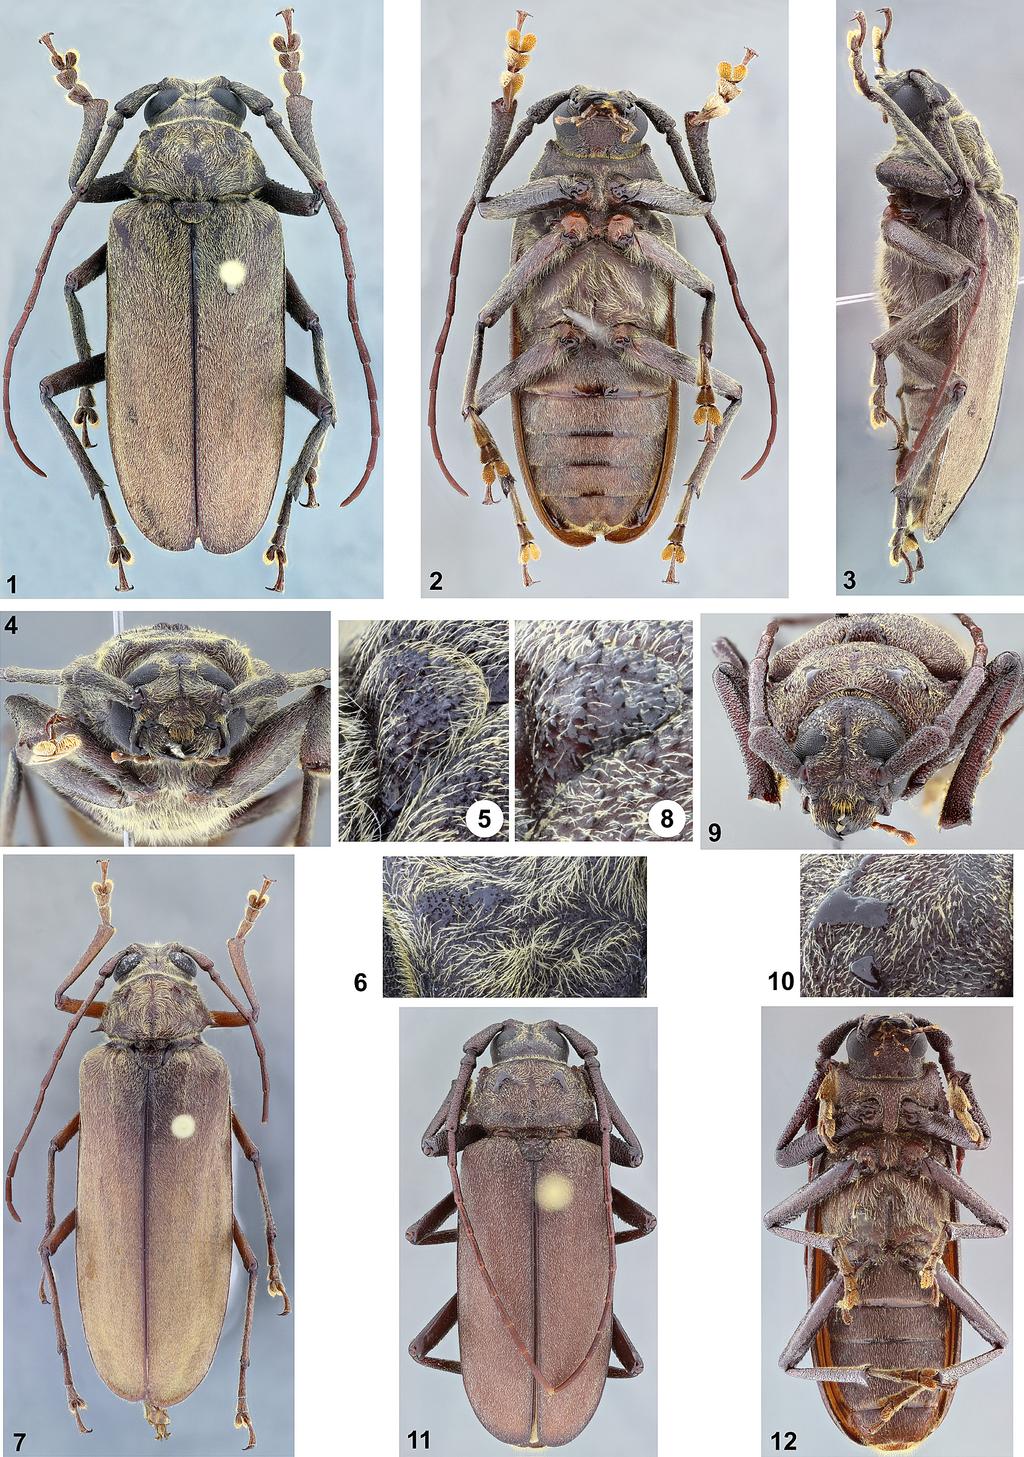 A new species of Strongylaspis Insecta Mundi 0629, May 2018 5 Figures 1 12. Strongylaspis spp. 1 7) Strongylaspis antonkozlovi. 1) Dorsal habitus, holotype male. 2) Ventral habitus, holotype male.